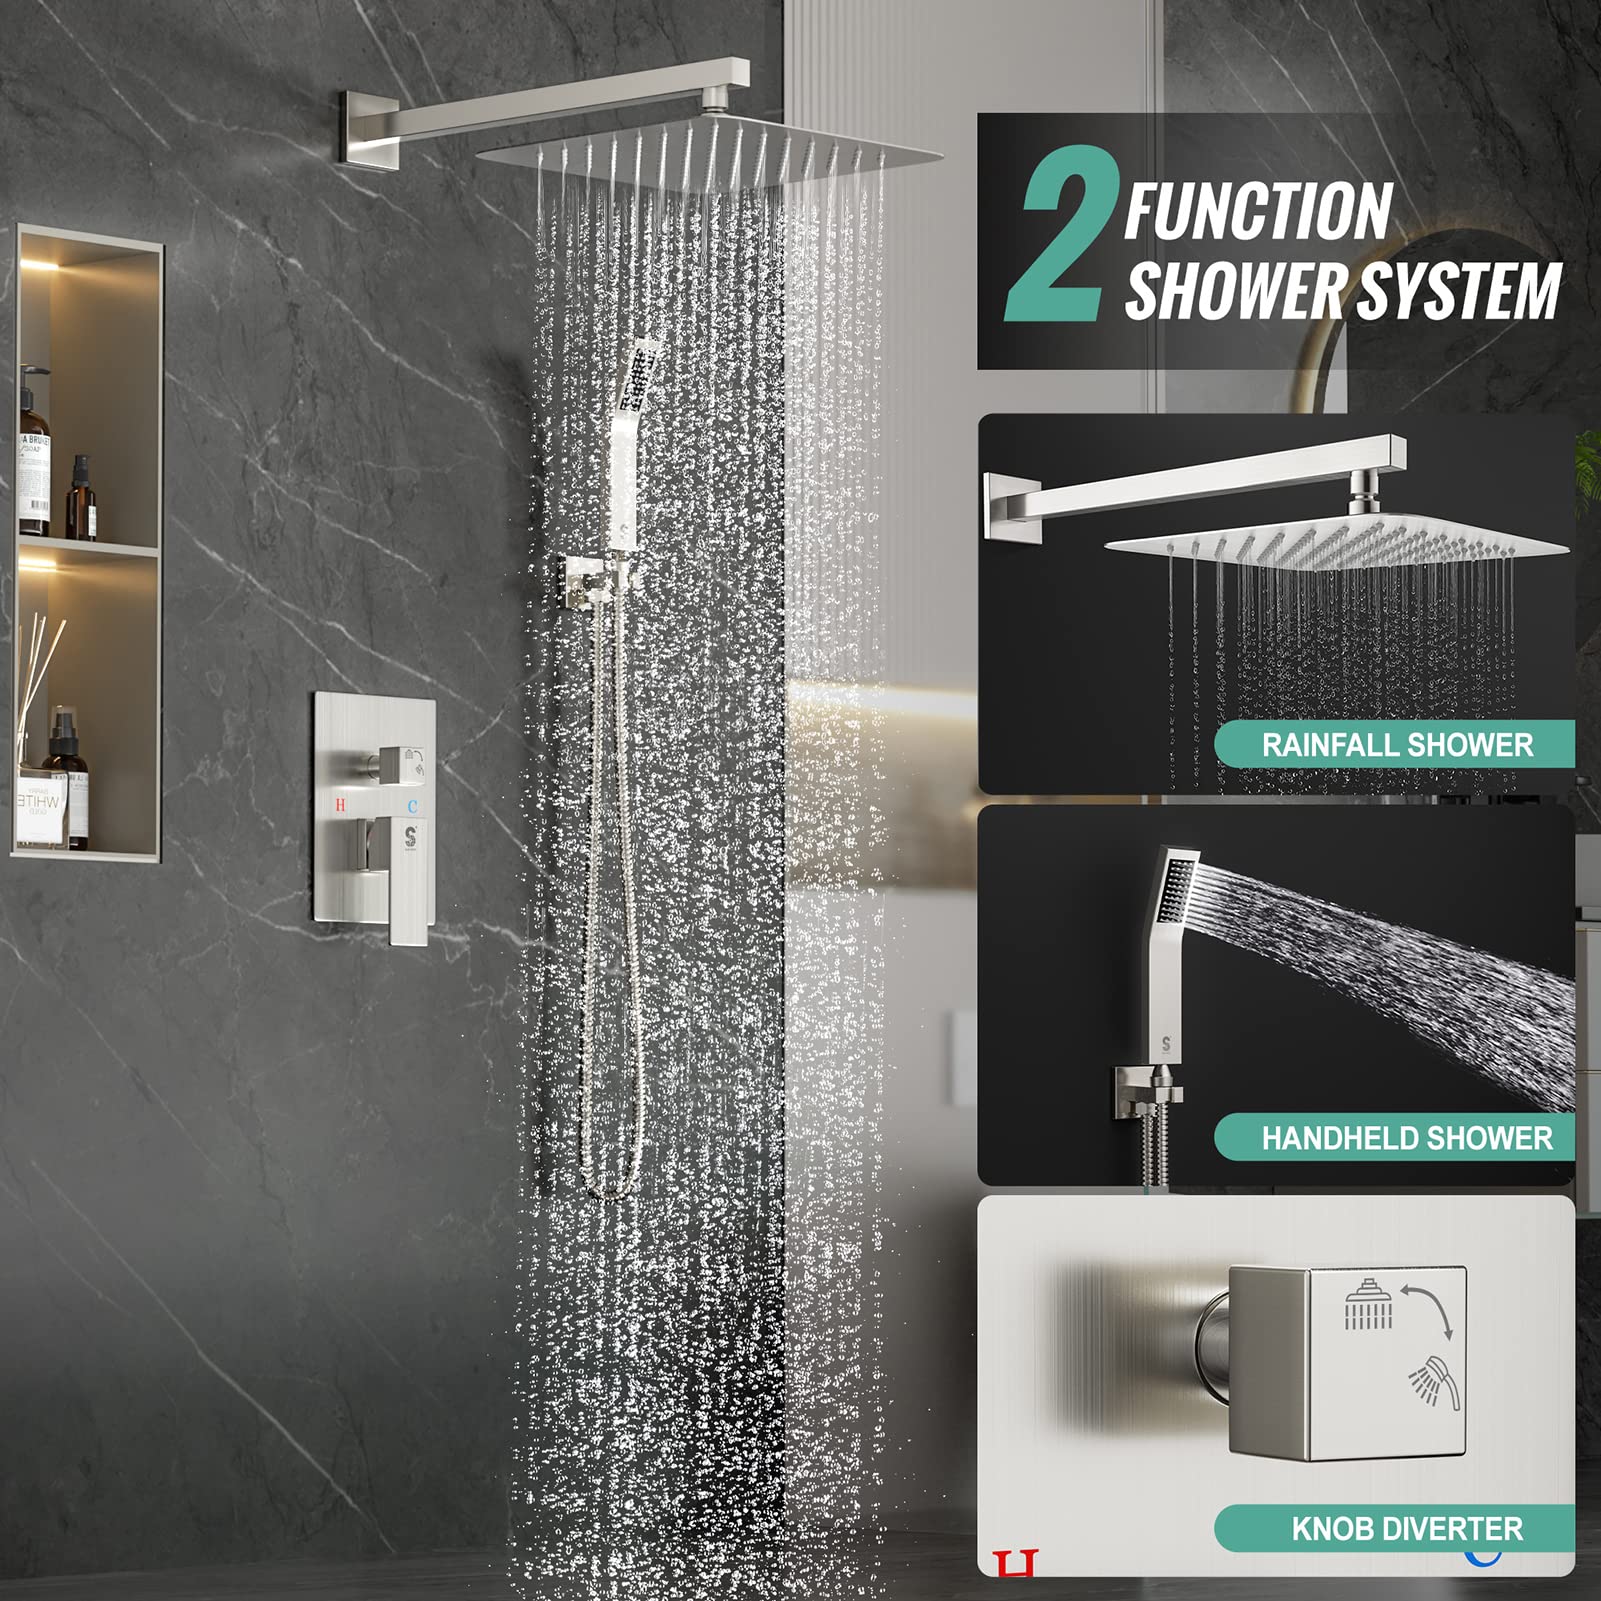 SR SUN RISE 12 Inches Bathroom Luxury Rain Mixer Shower Combo Set Wall Mounted Rainfall Shower Head System Brushed Nickel Finish Shower Faucet Rough-In